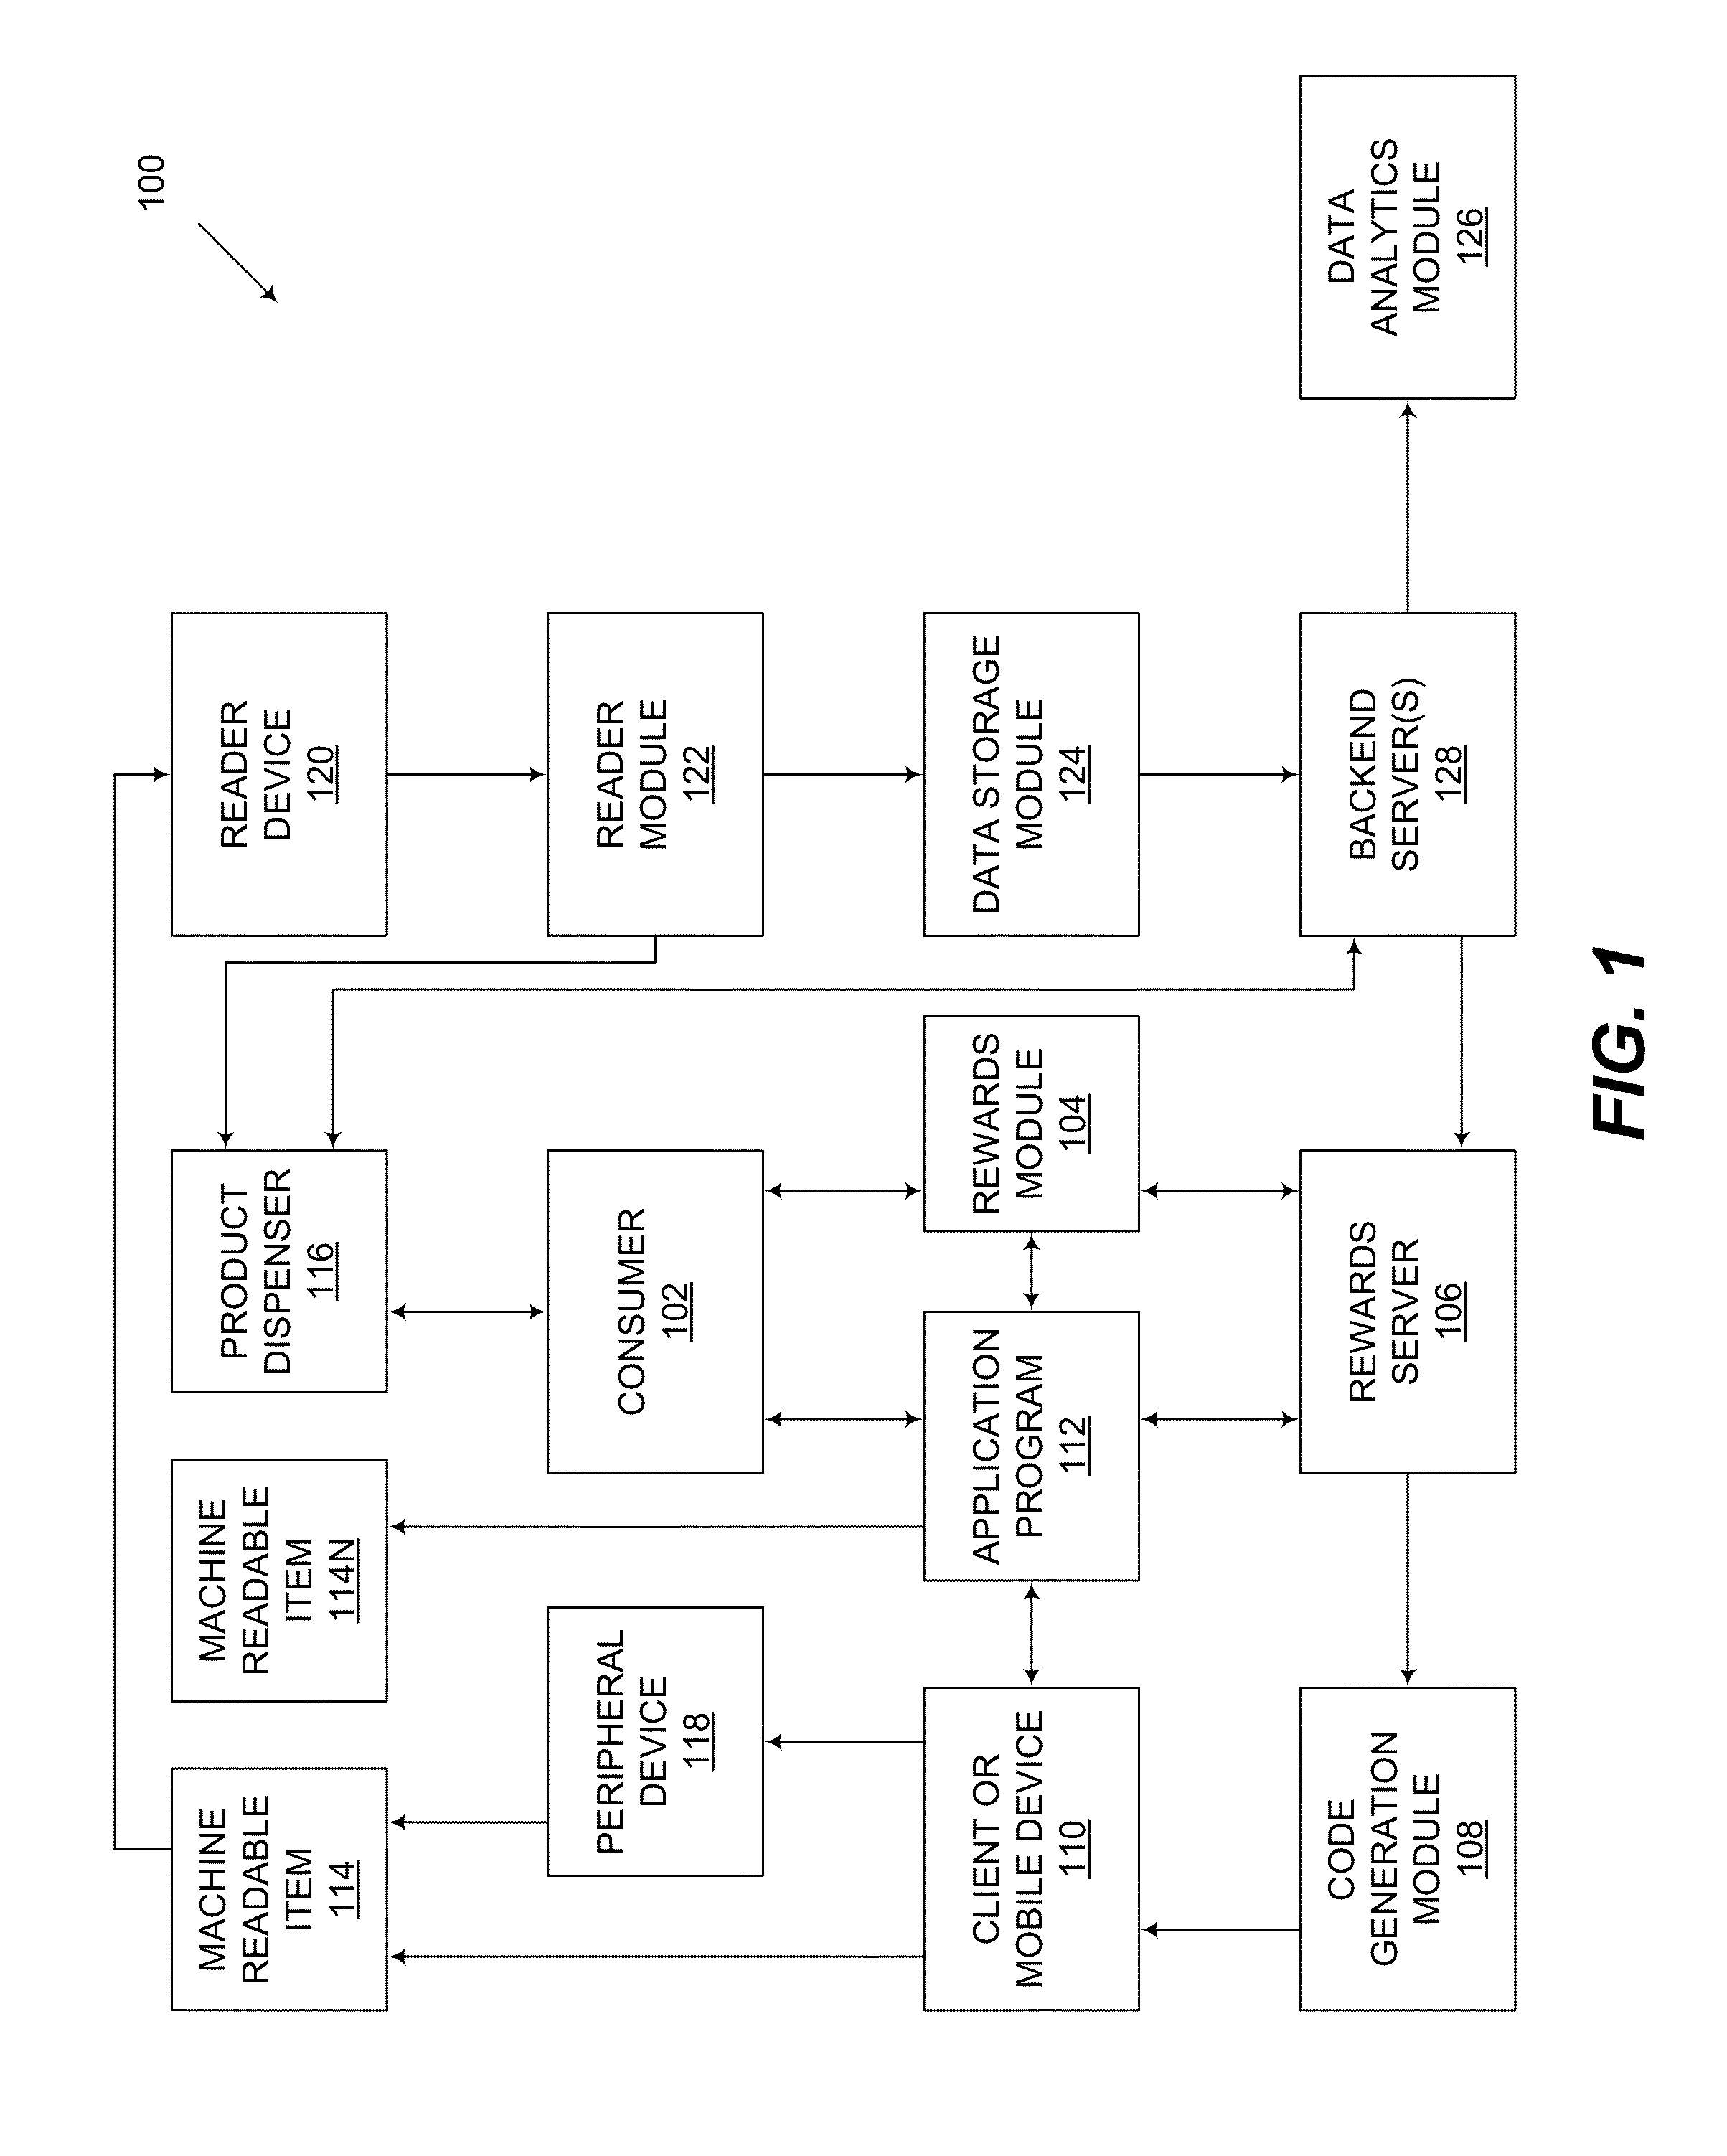 Systems and Methods for Providing a Combined Product for Dispensing from a Product Dispenser